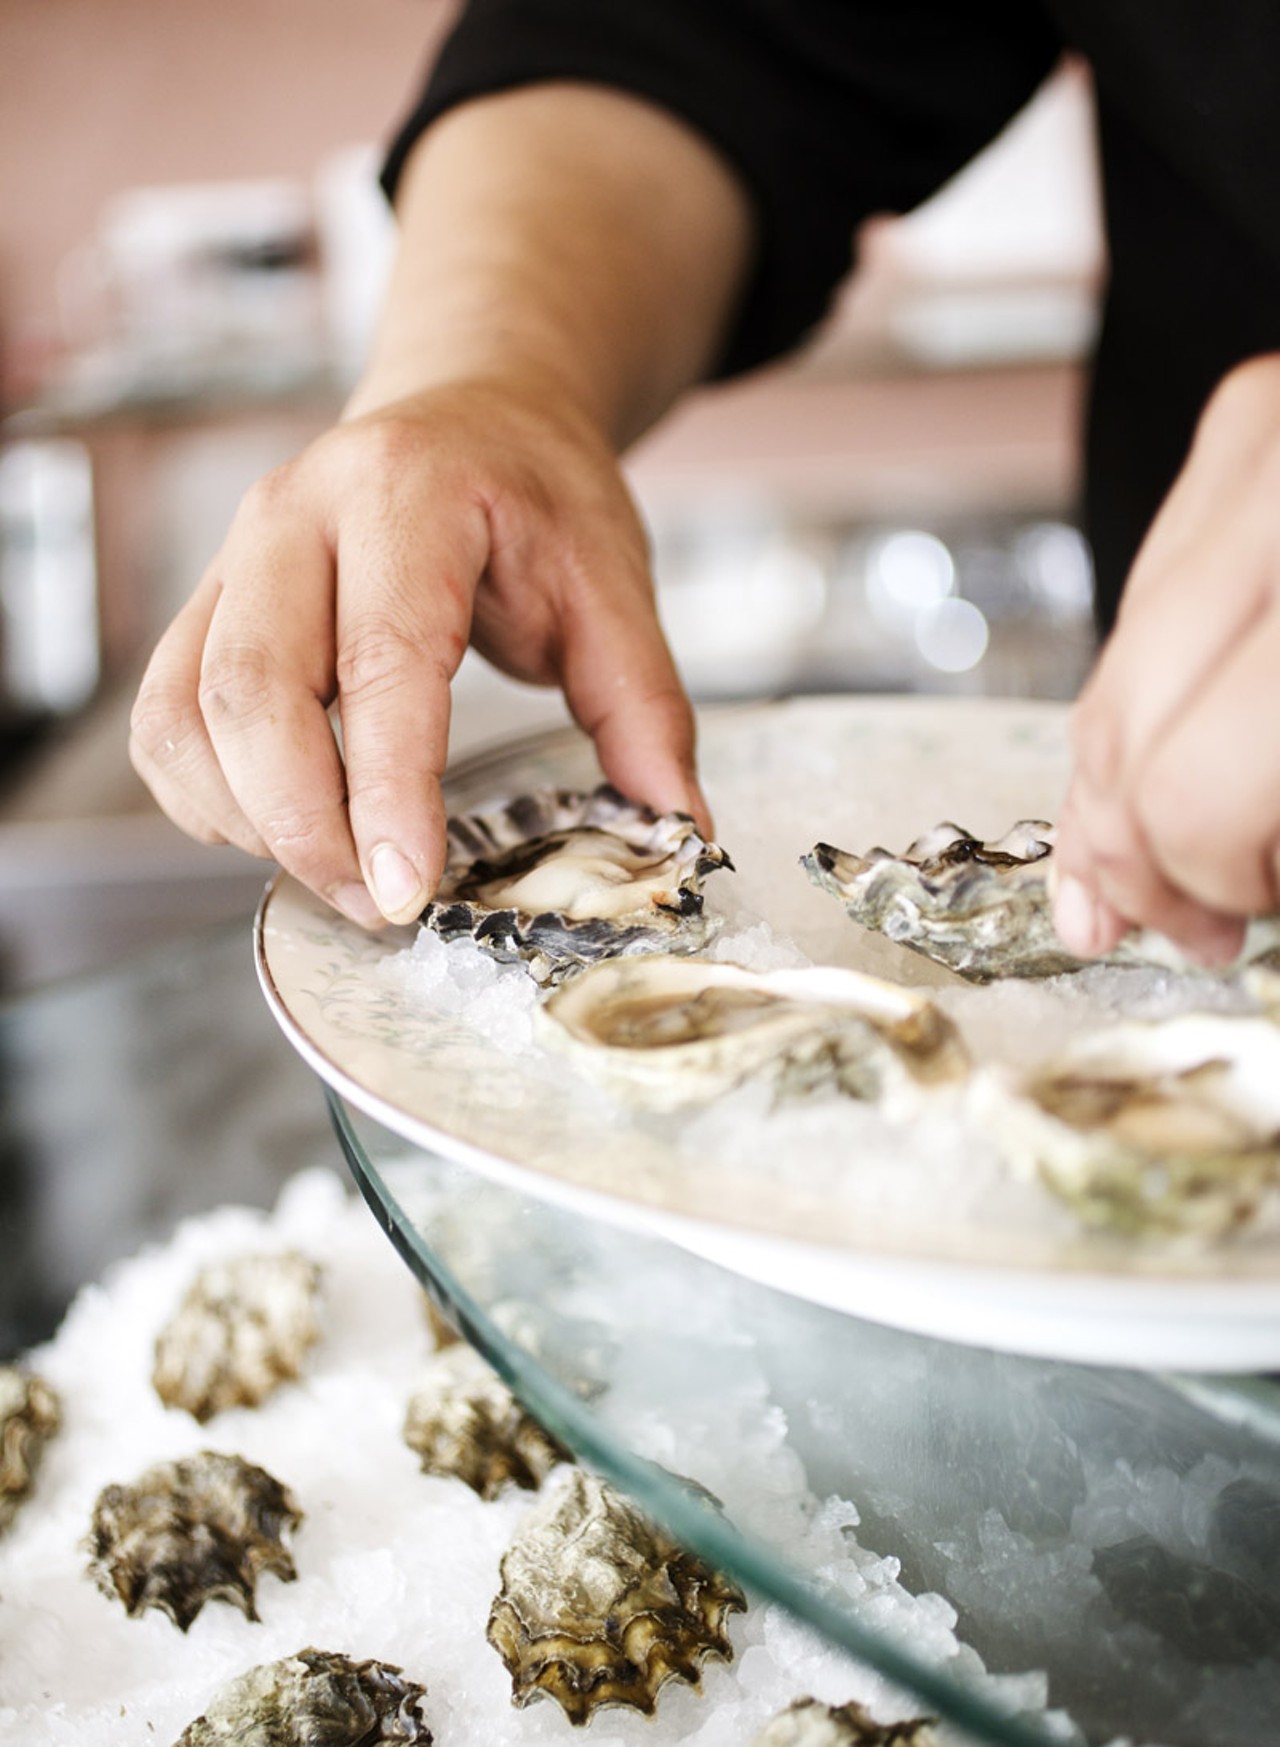 Chef Je Kang plating the fresh oysters.